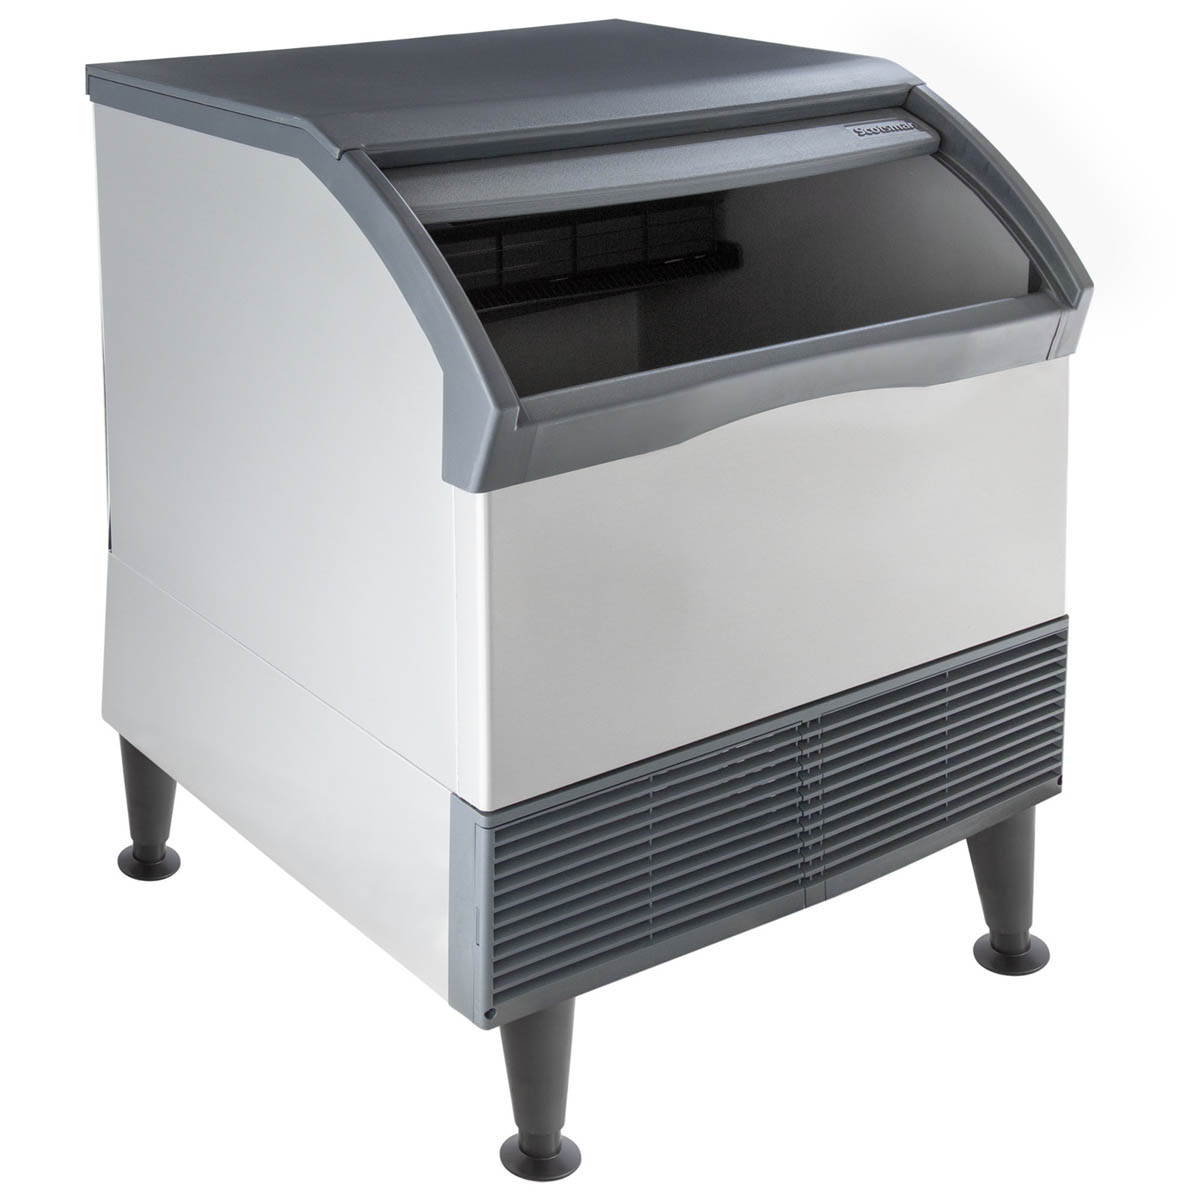 Scotsman CU3030MA-1 Self-Contained Under Counter Cuber with Storage, Chef's Deal